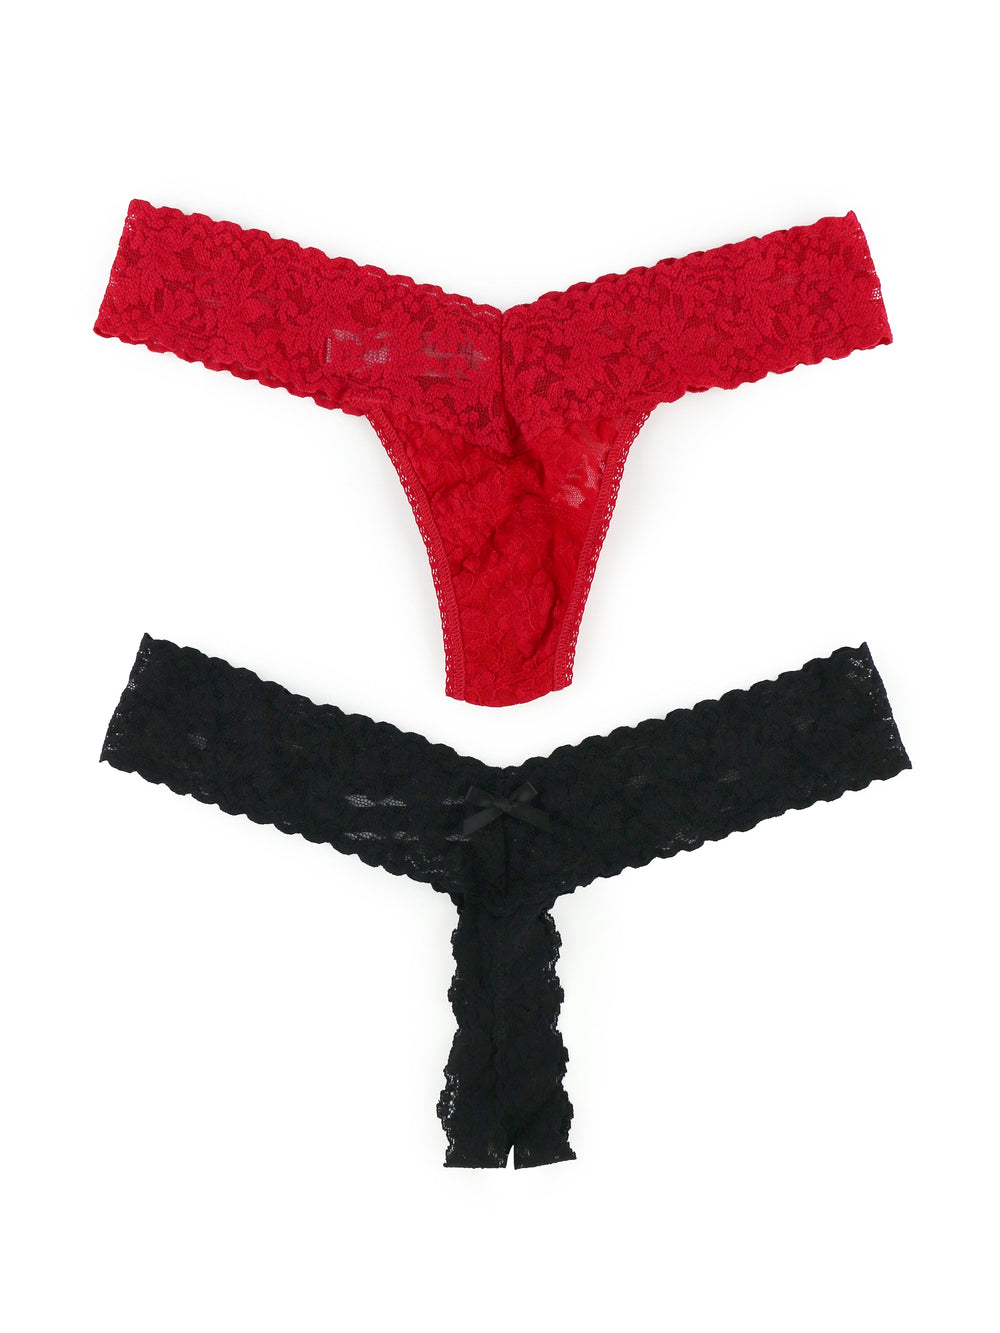 Victoria's Secret The Lacie Thong Panty Set of 3, Red Cross